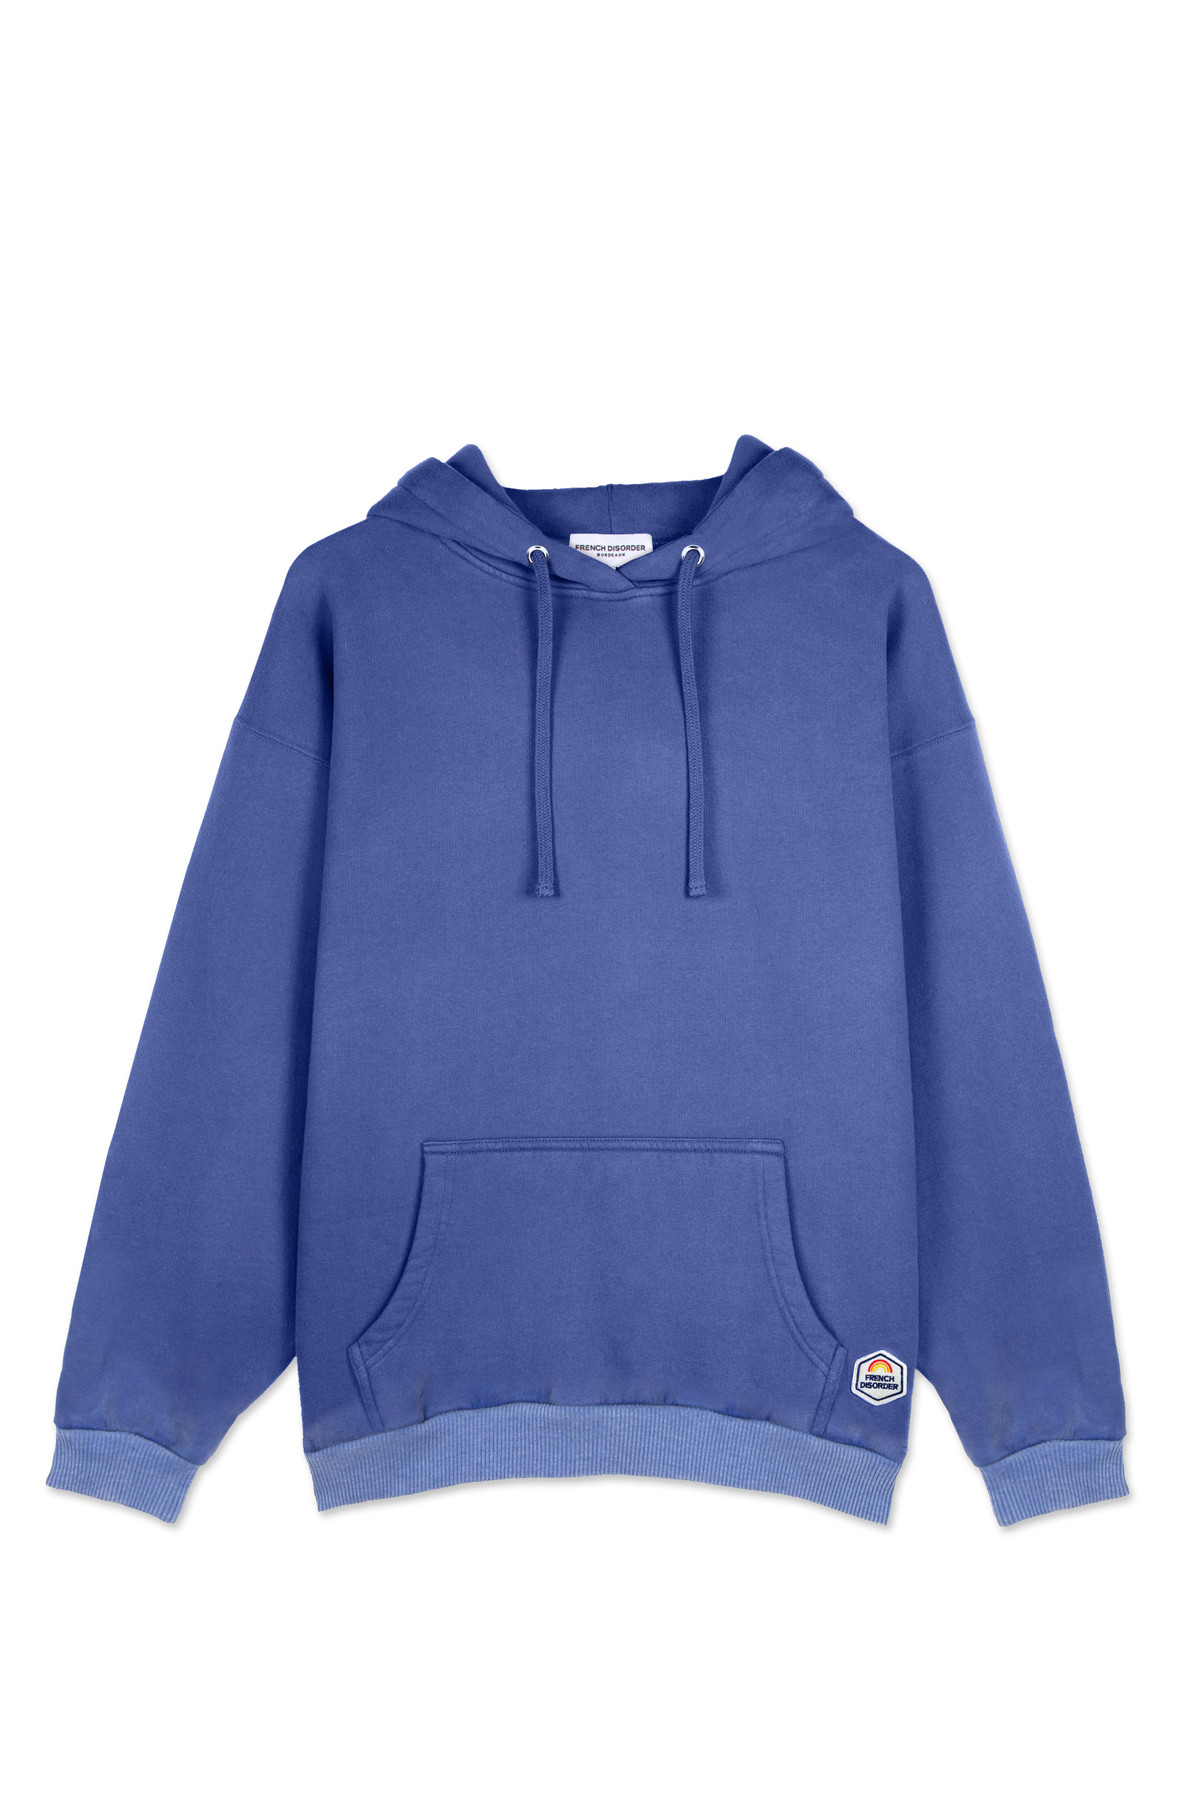 Photo de SWEATS À CAPUCHE Hoodie HOMME NUDE Washed chez French Disorder